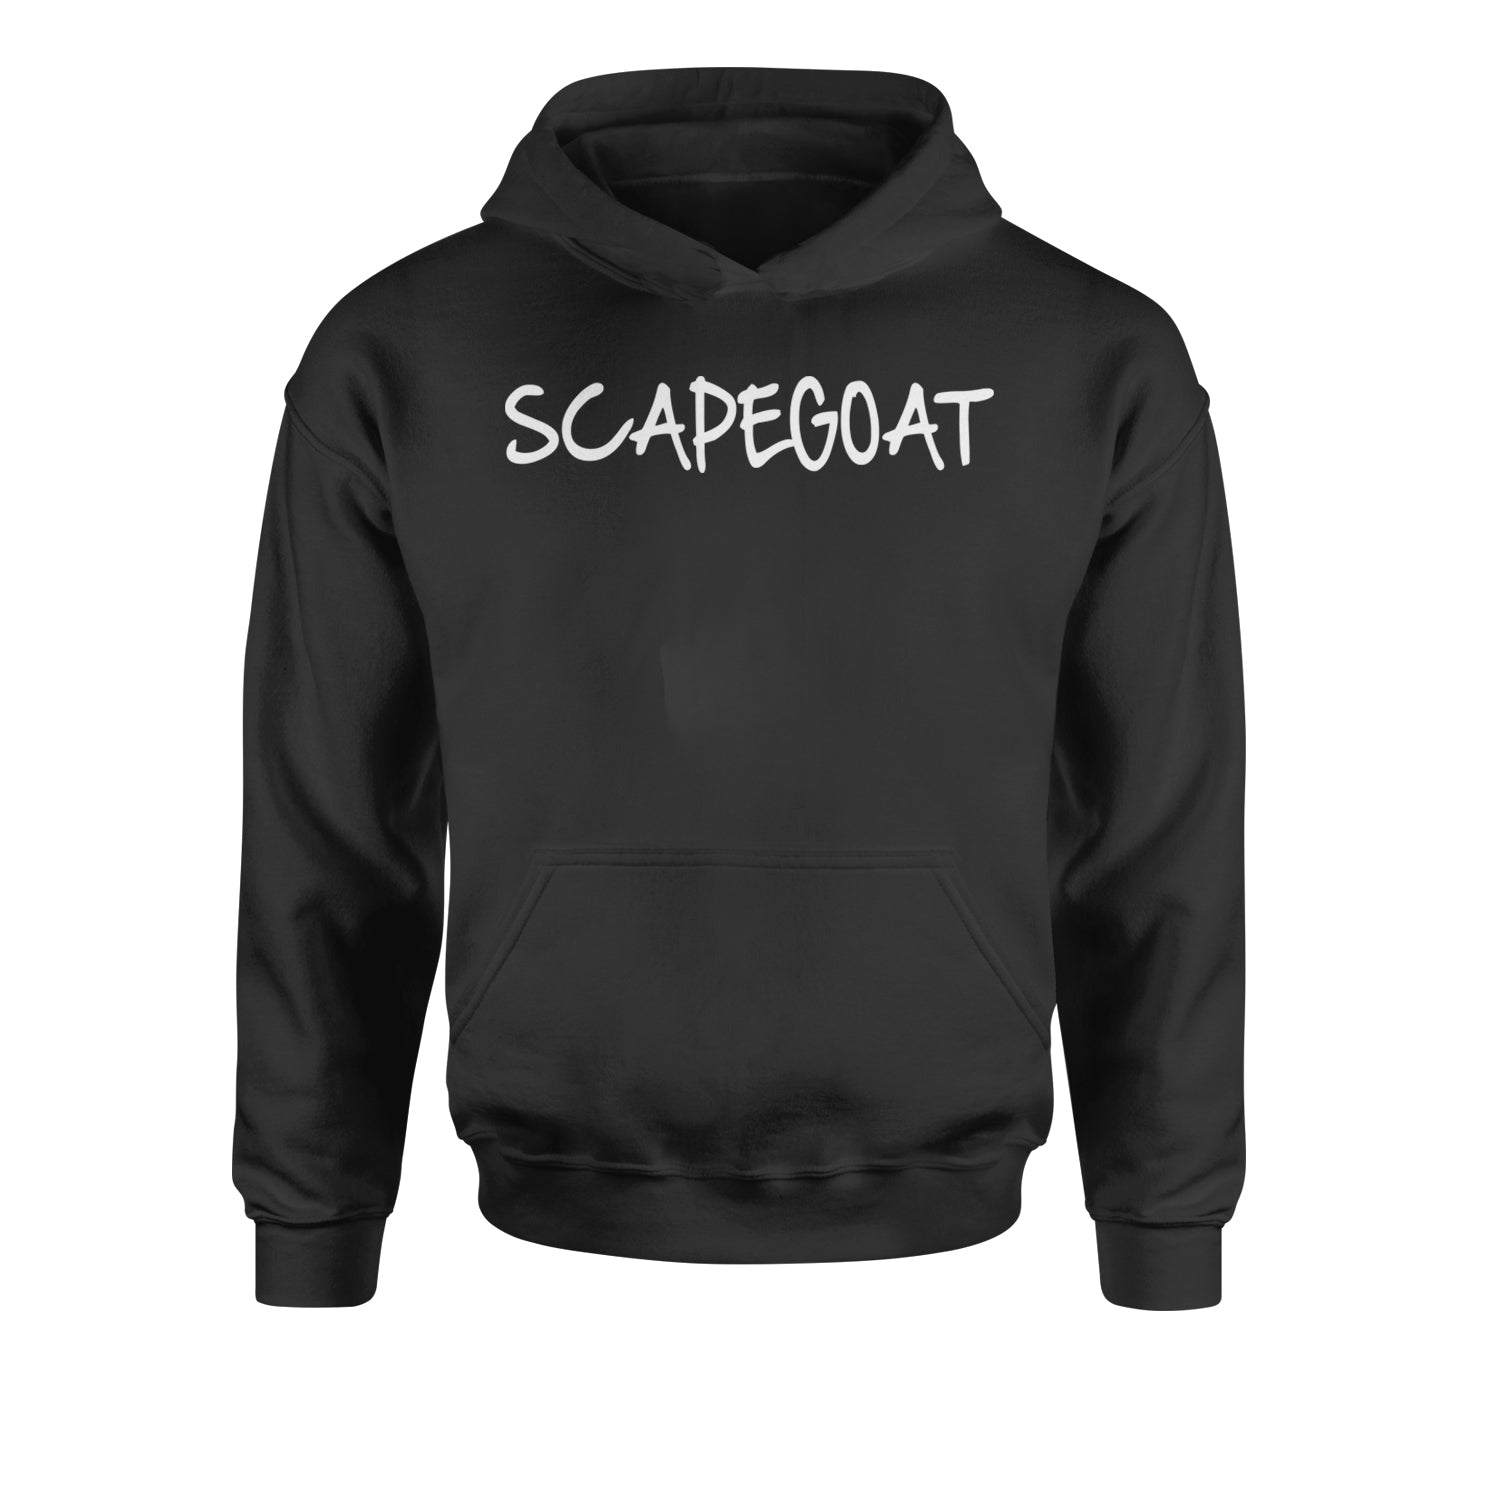 Scapegoat Wrestling Youth-Sized Hoodie